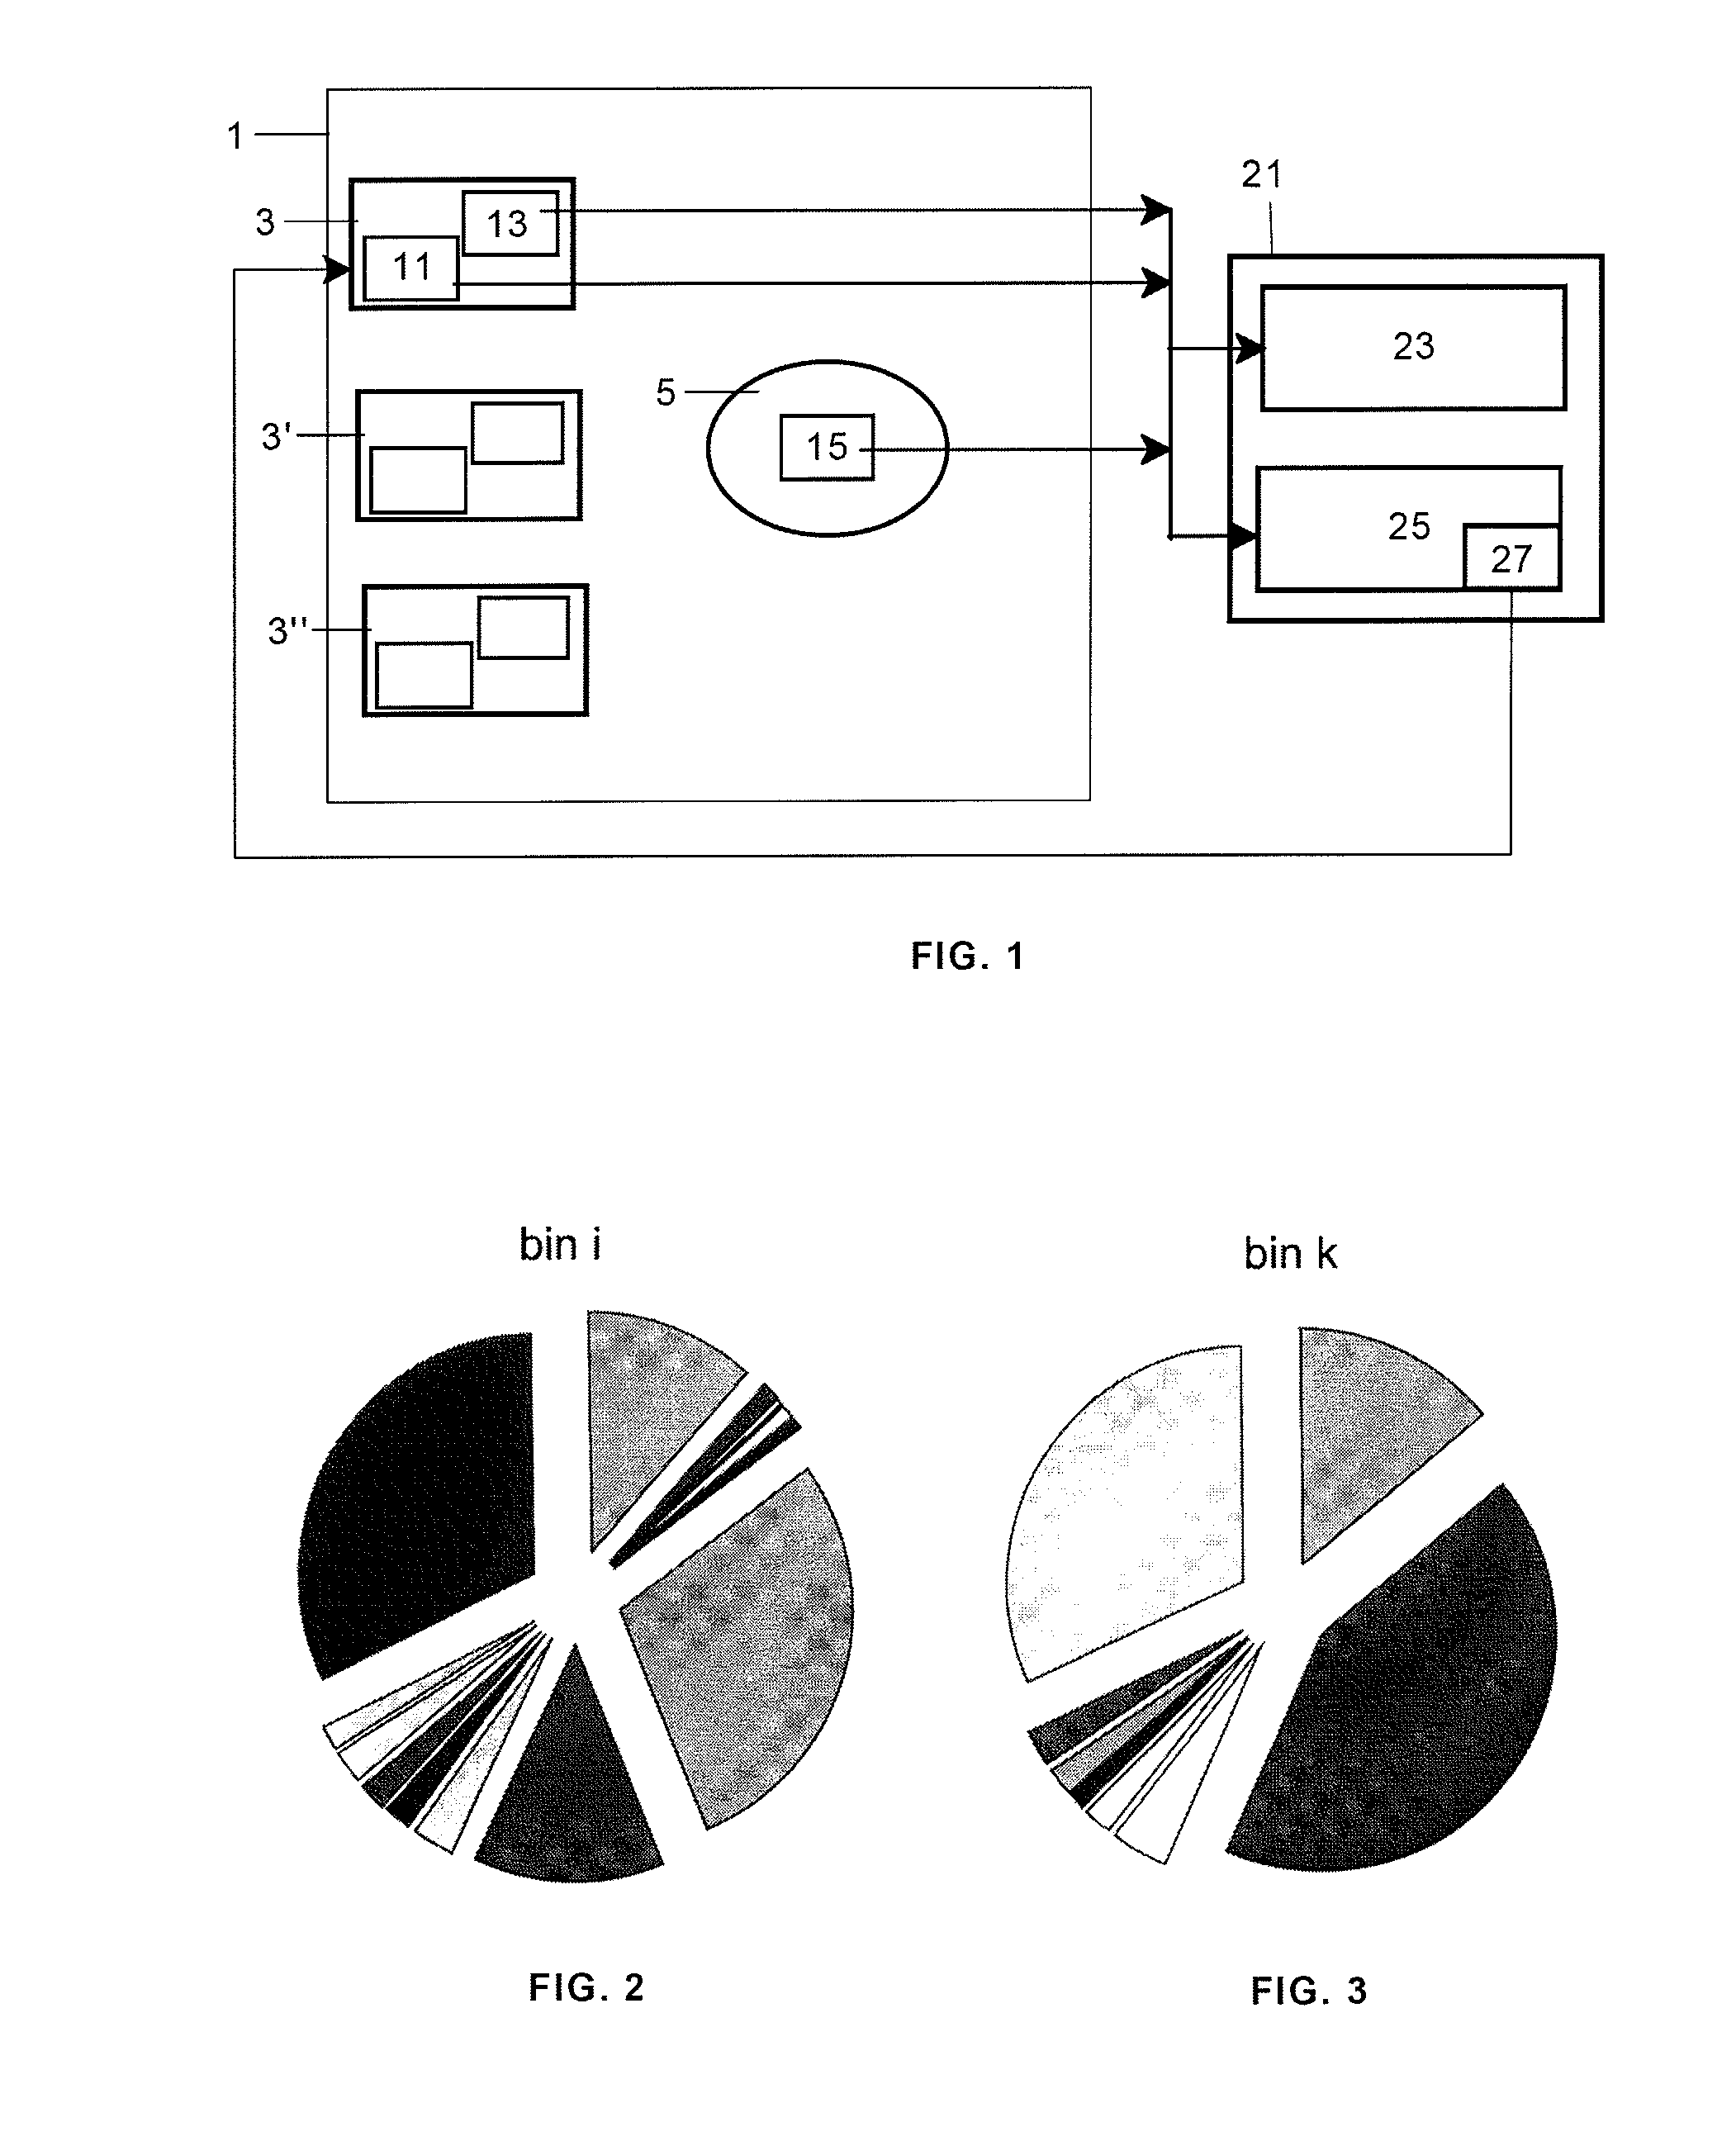 System for evaluating and controlling the efficiency of a wind turbine